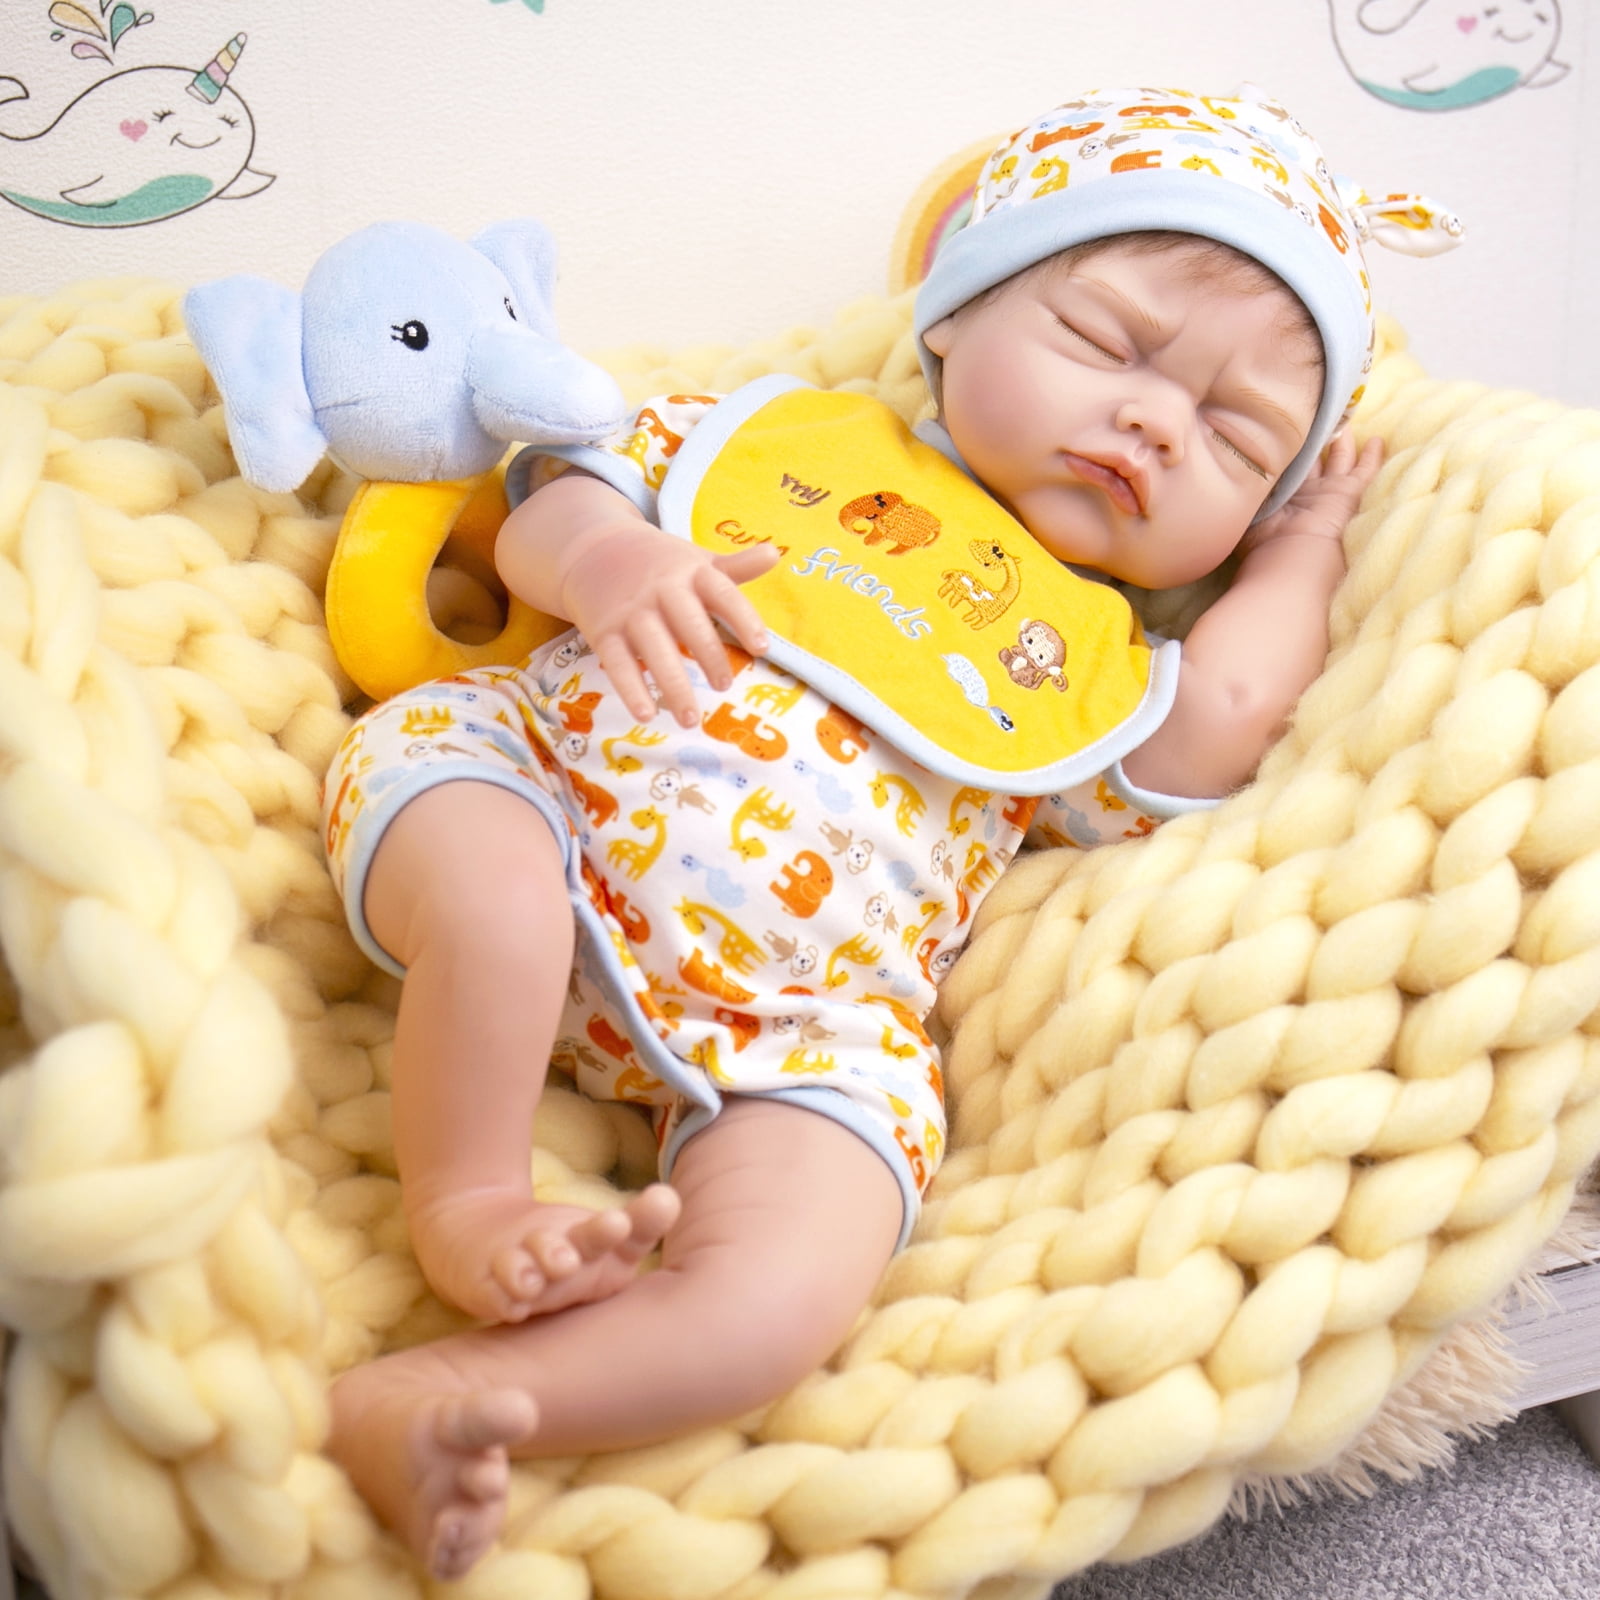 55CM Reborn Baby Girl With Elephant Very Soft Full Body Silicone Doll Bath  Lifelike Real Touch child Toy - AliExpress